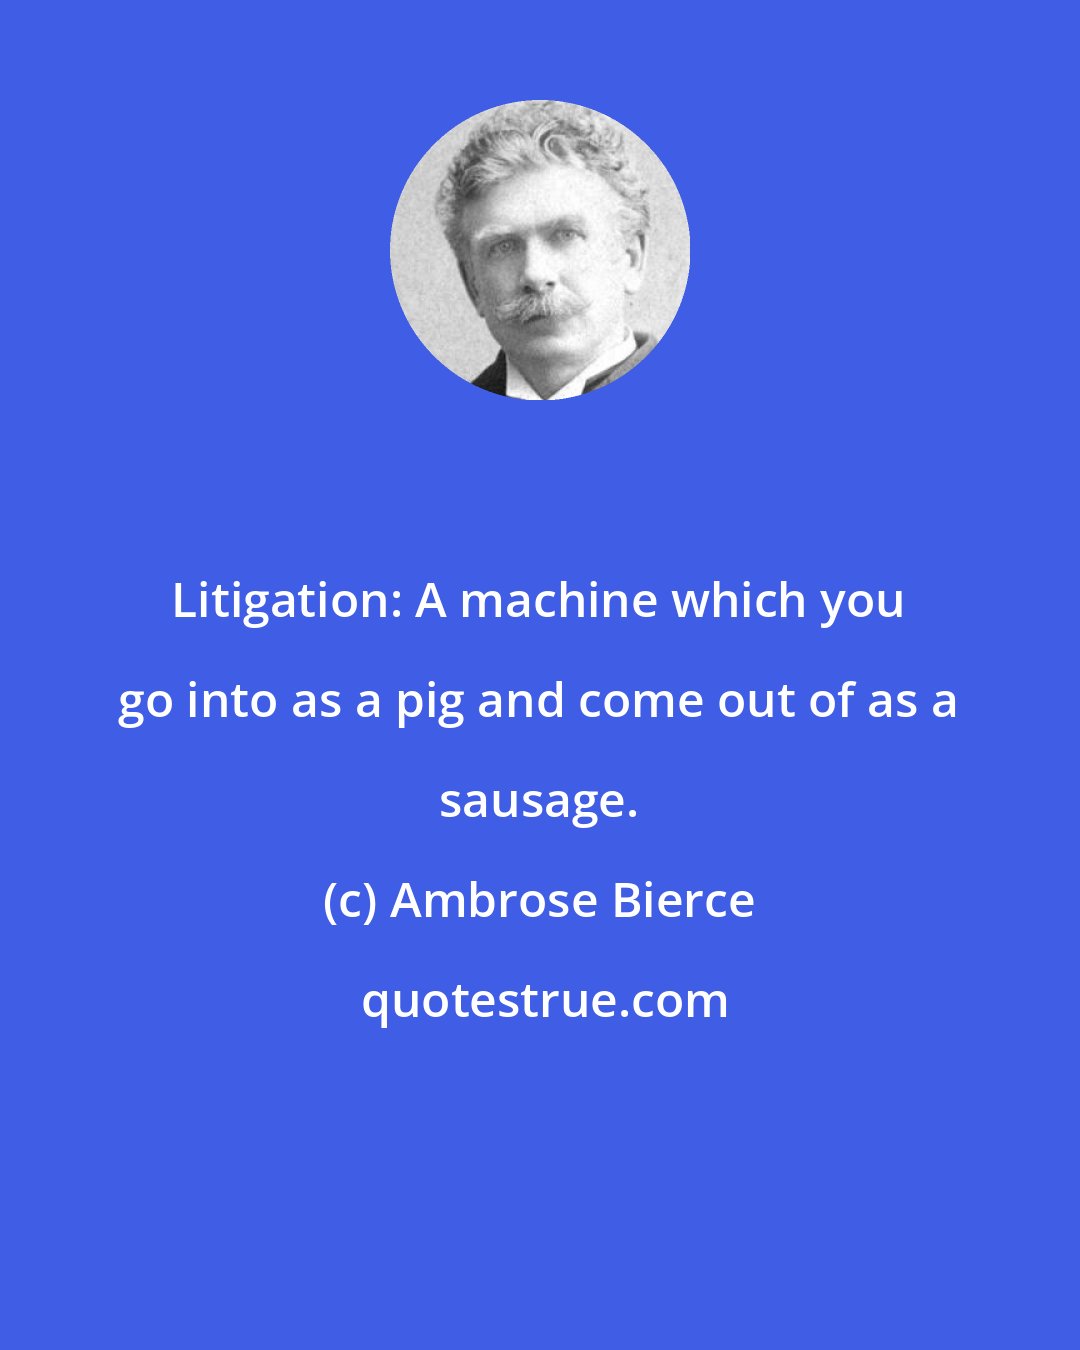 Ambrose Bierce: Litigation: A machine which you go into as a pig and come out of as a sausage.